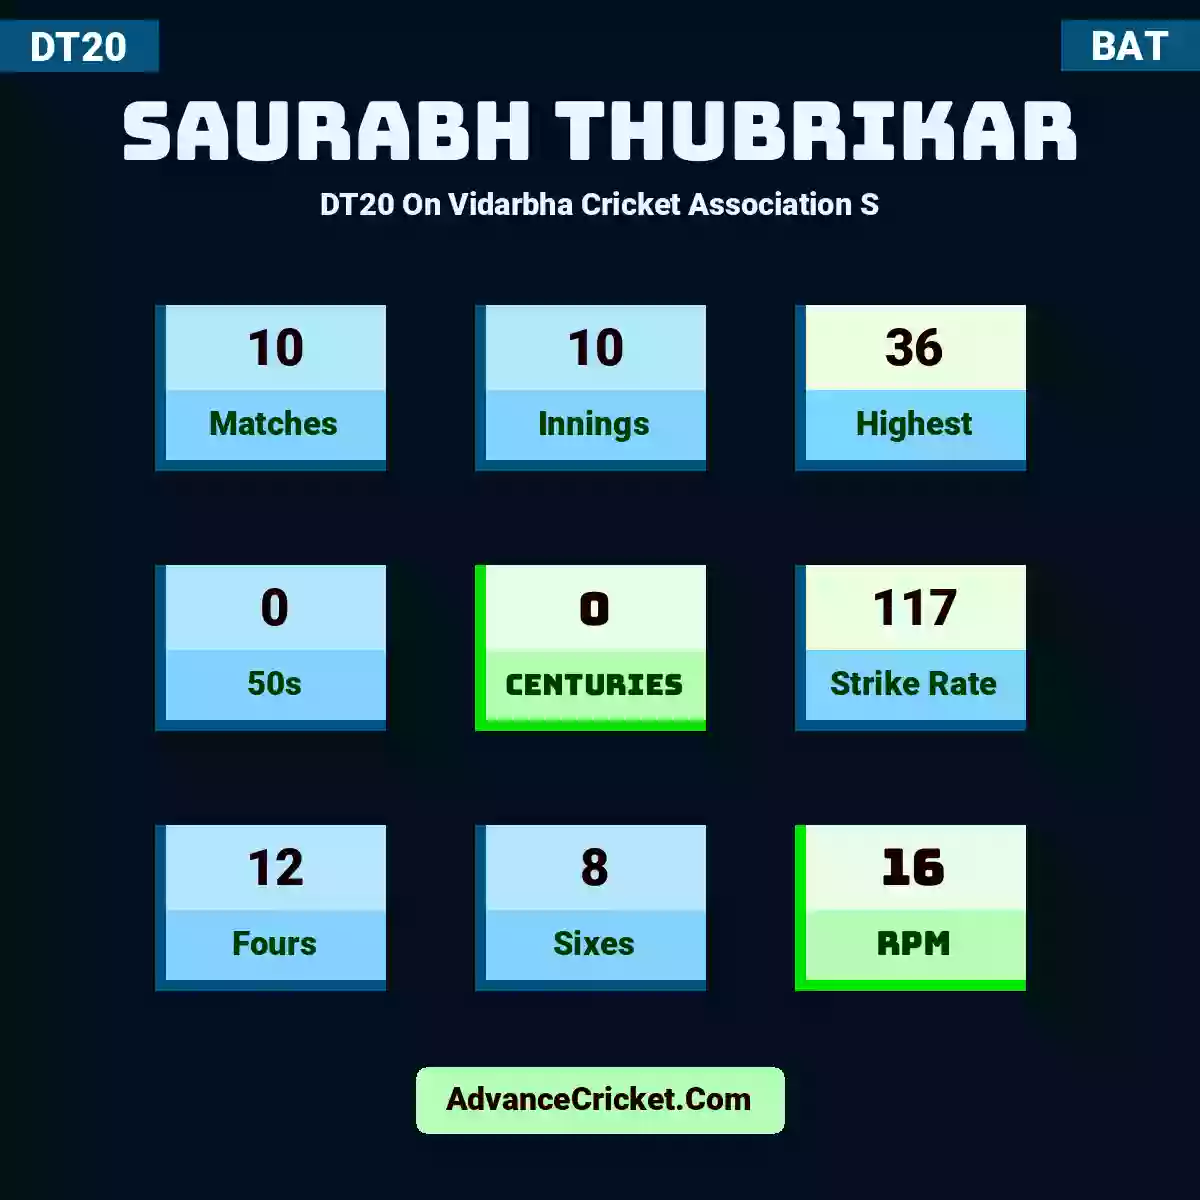 Saurabh Thubrikar DT20  On Vidarbha Cricket Association S, Saurabh Thubrikar played 10 matches, scored 36 runs as highest, 0 half-centuries, and 0 centuries, with a strike rate of 117. S.Thubrikar hit 12 fours and 8 sixes, with an RPM of 16.